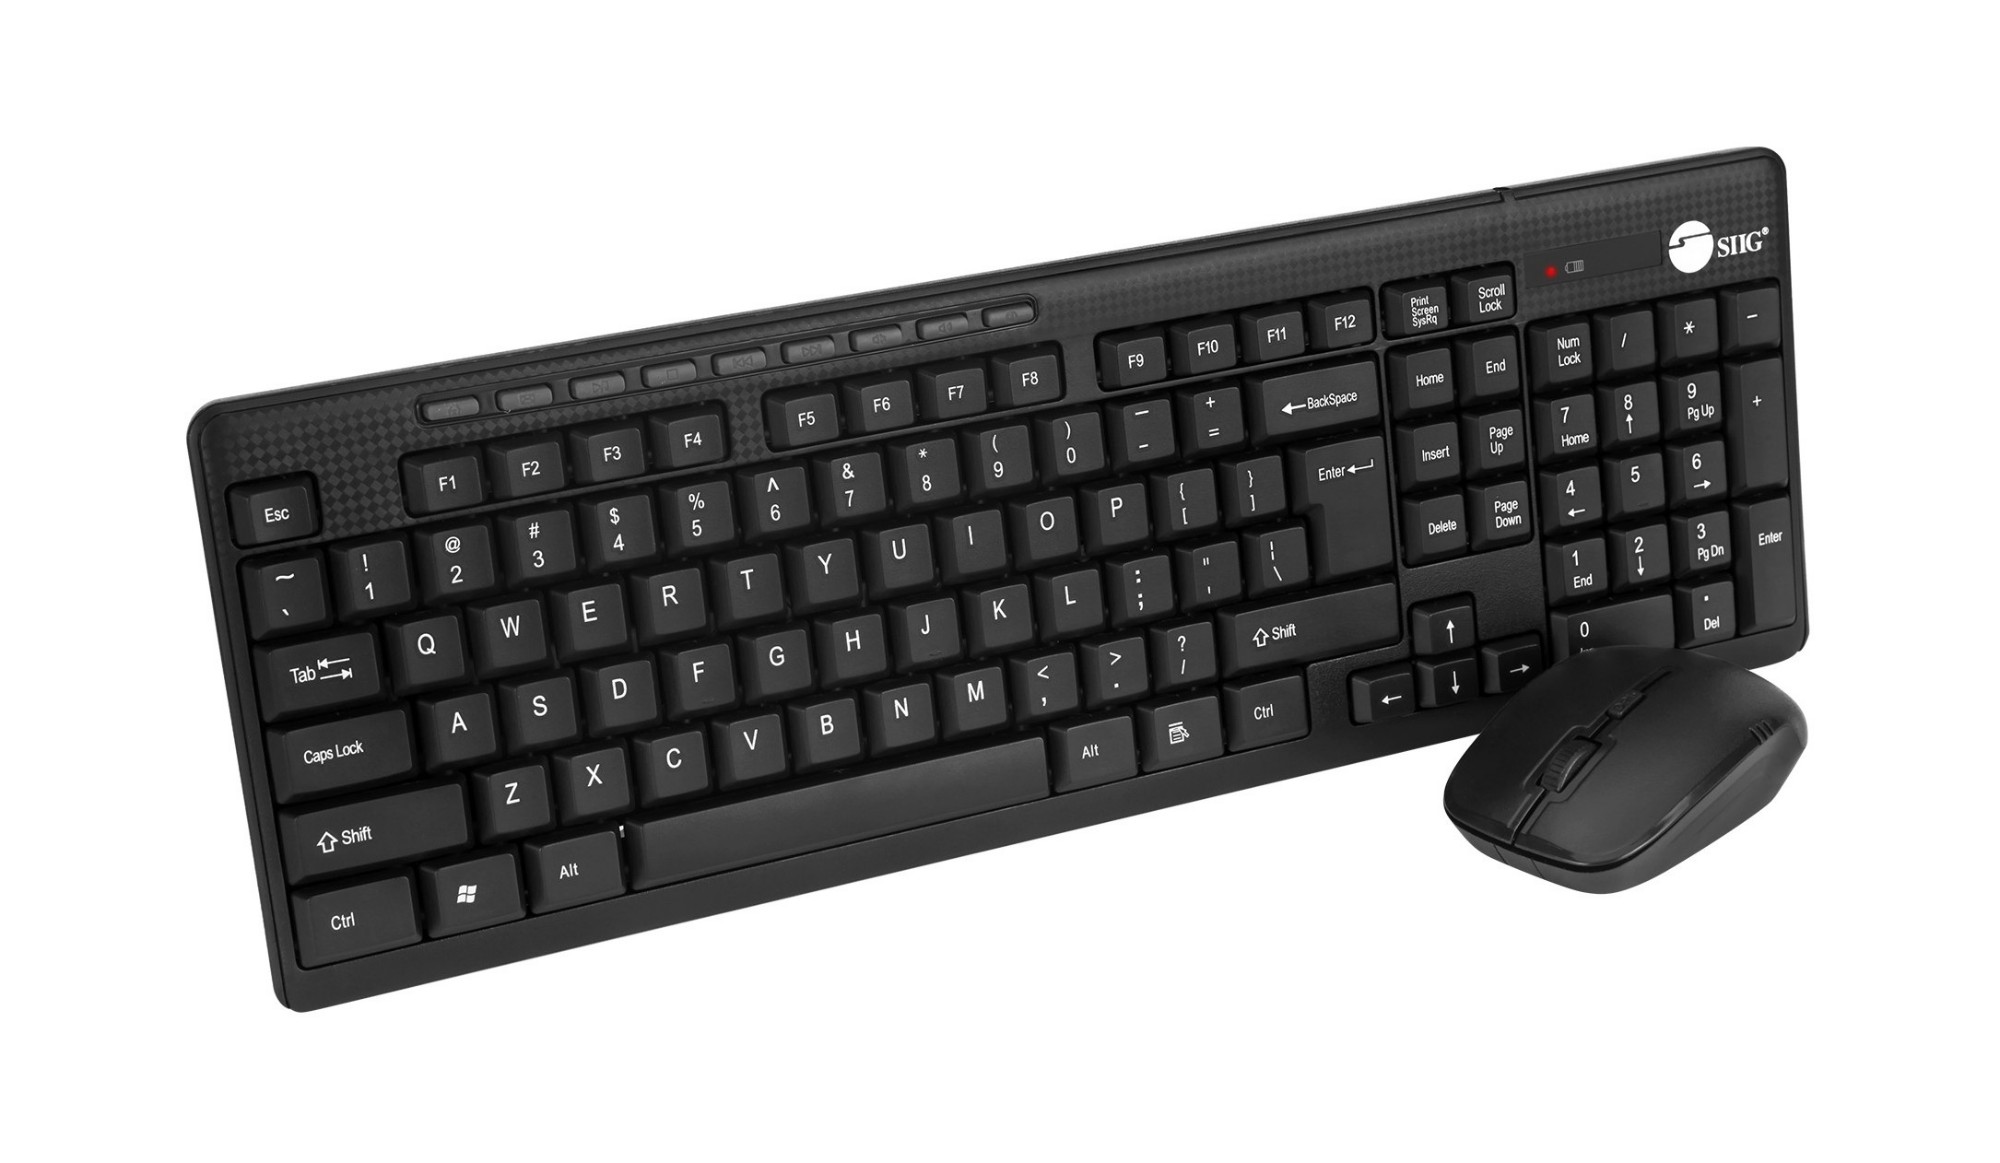 JK-WR0T12-S1 SIIG STANDARD SIZE 102-KEY WIRELESS KEYBOARD WITH 3-BUTTON WIRELESS OPTICAL MOUSE, 2.